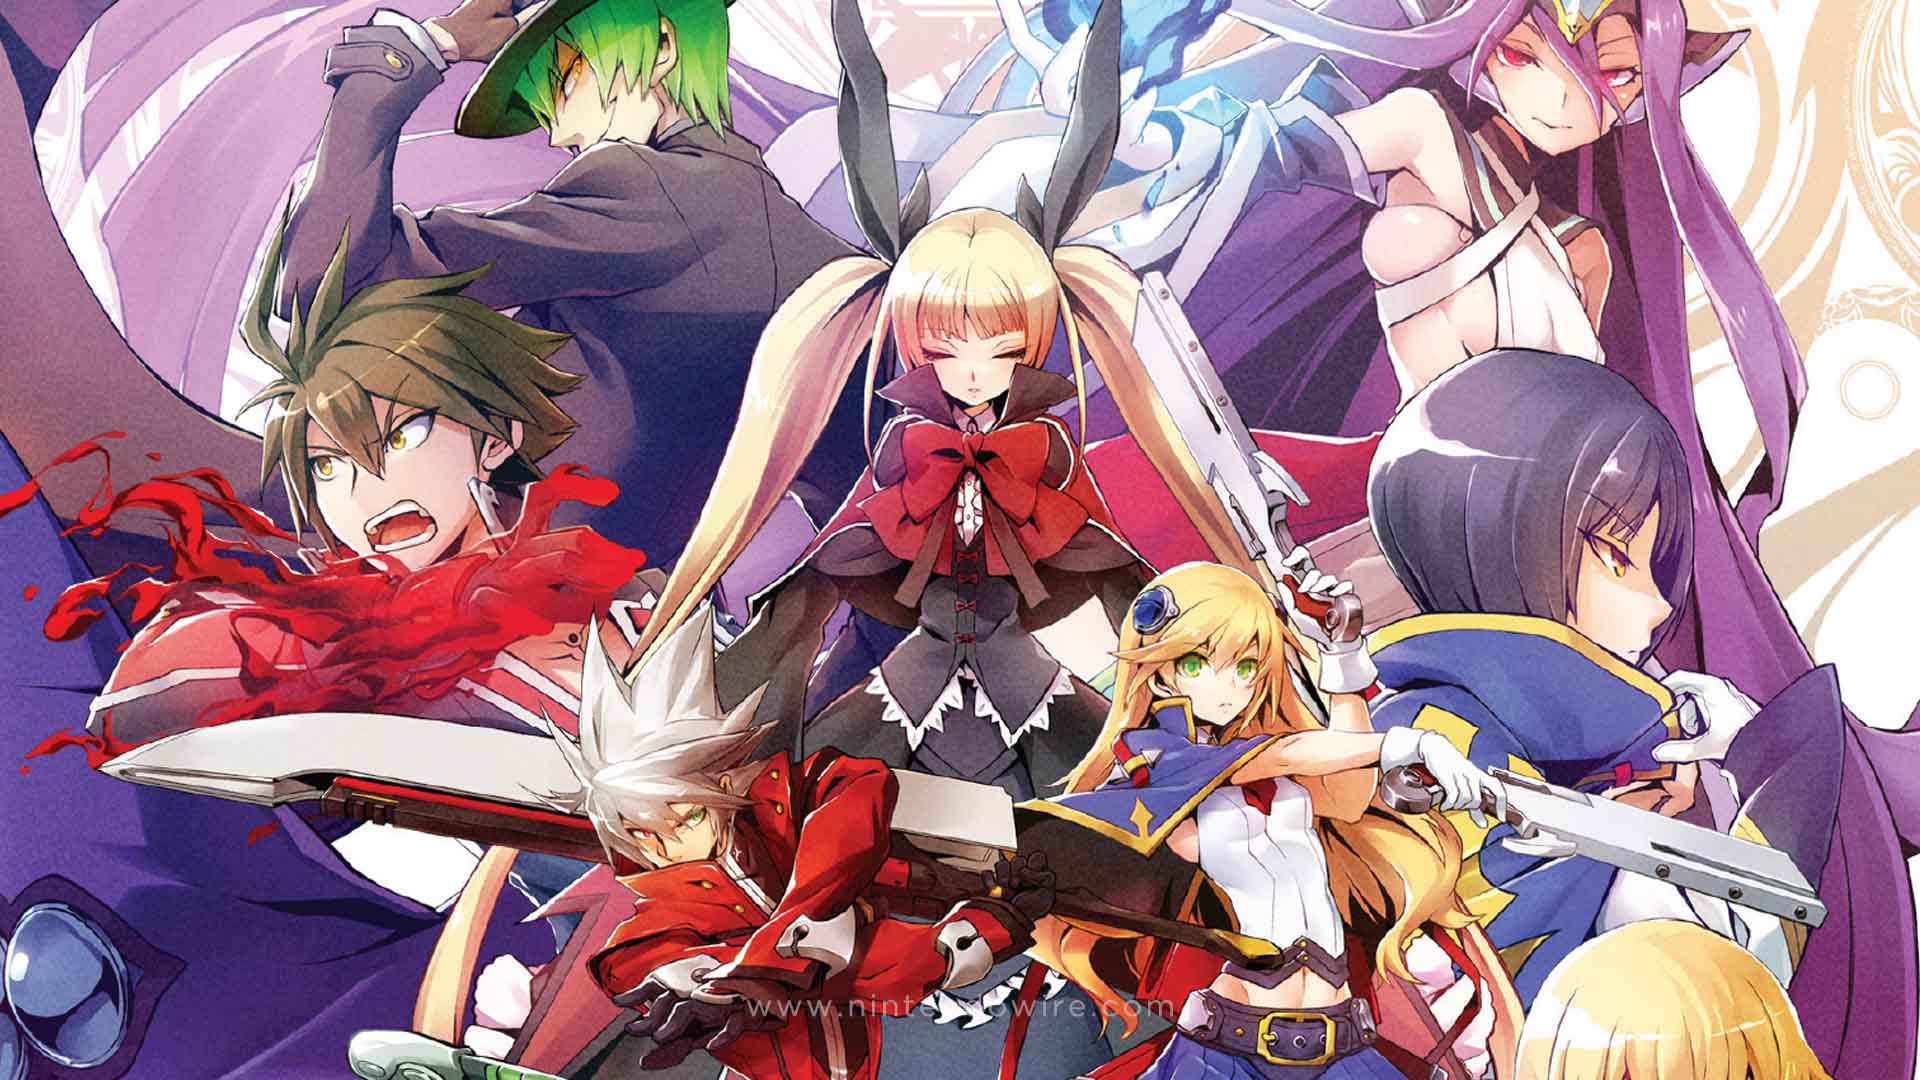 BlazBlue: Centralfiction Special Edition releasing in Japan on February 7th...